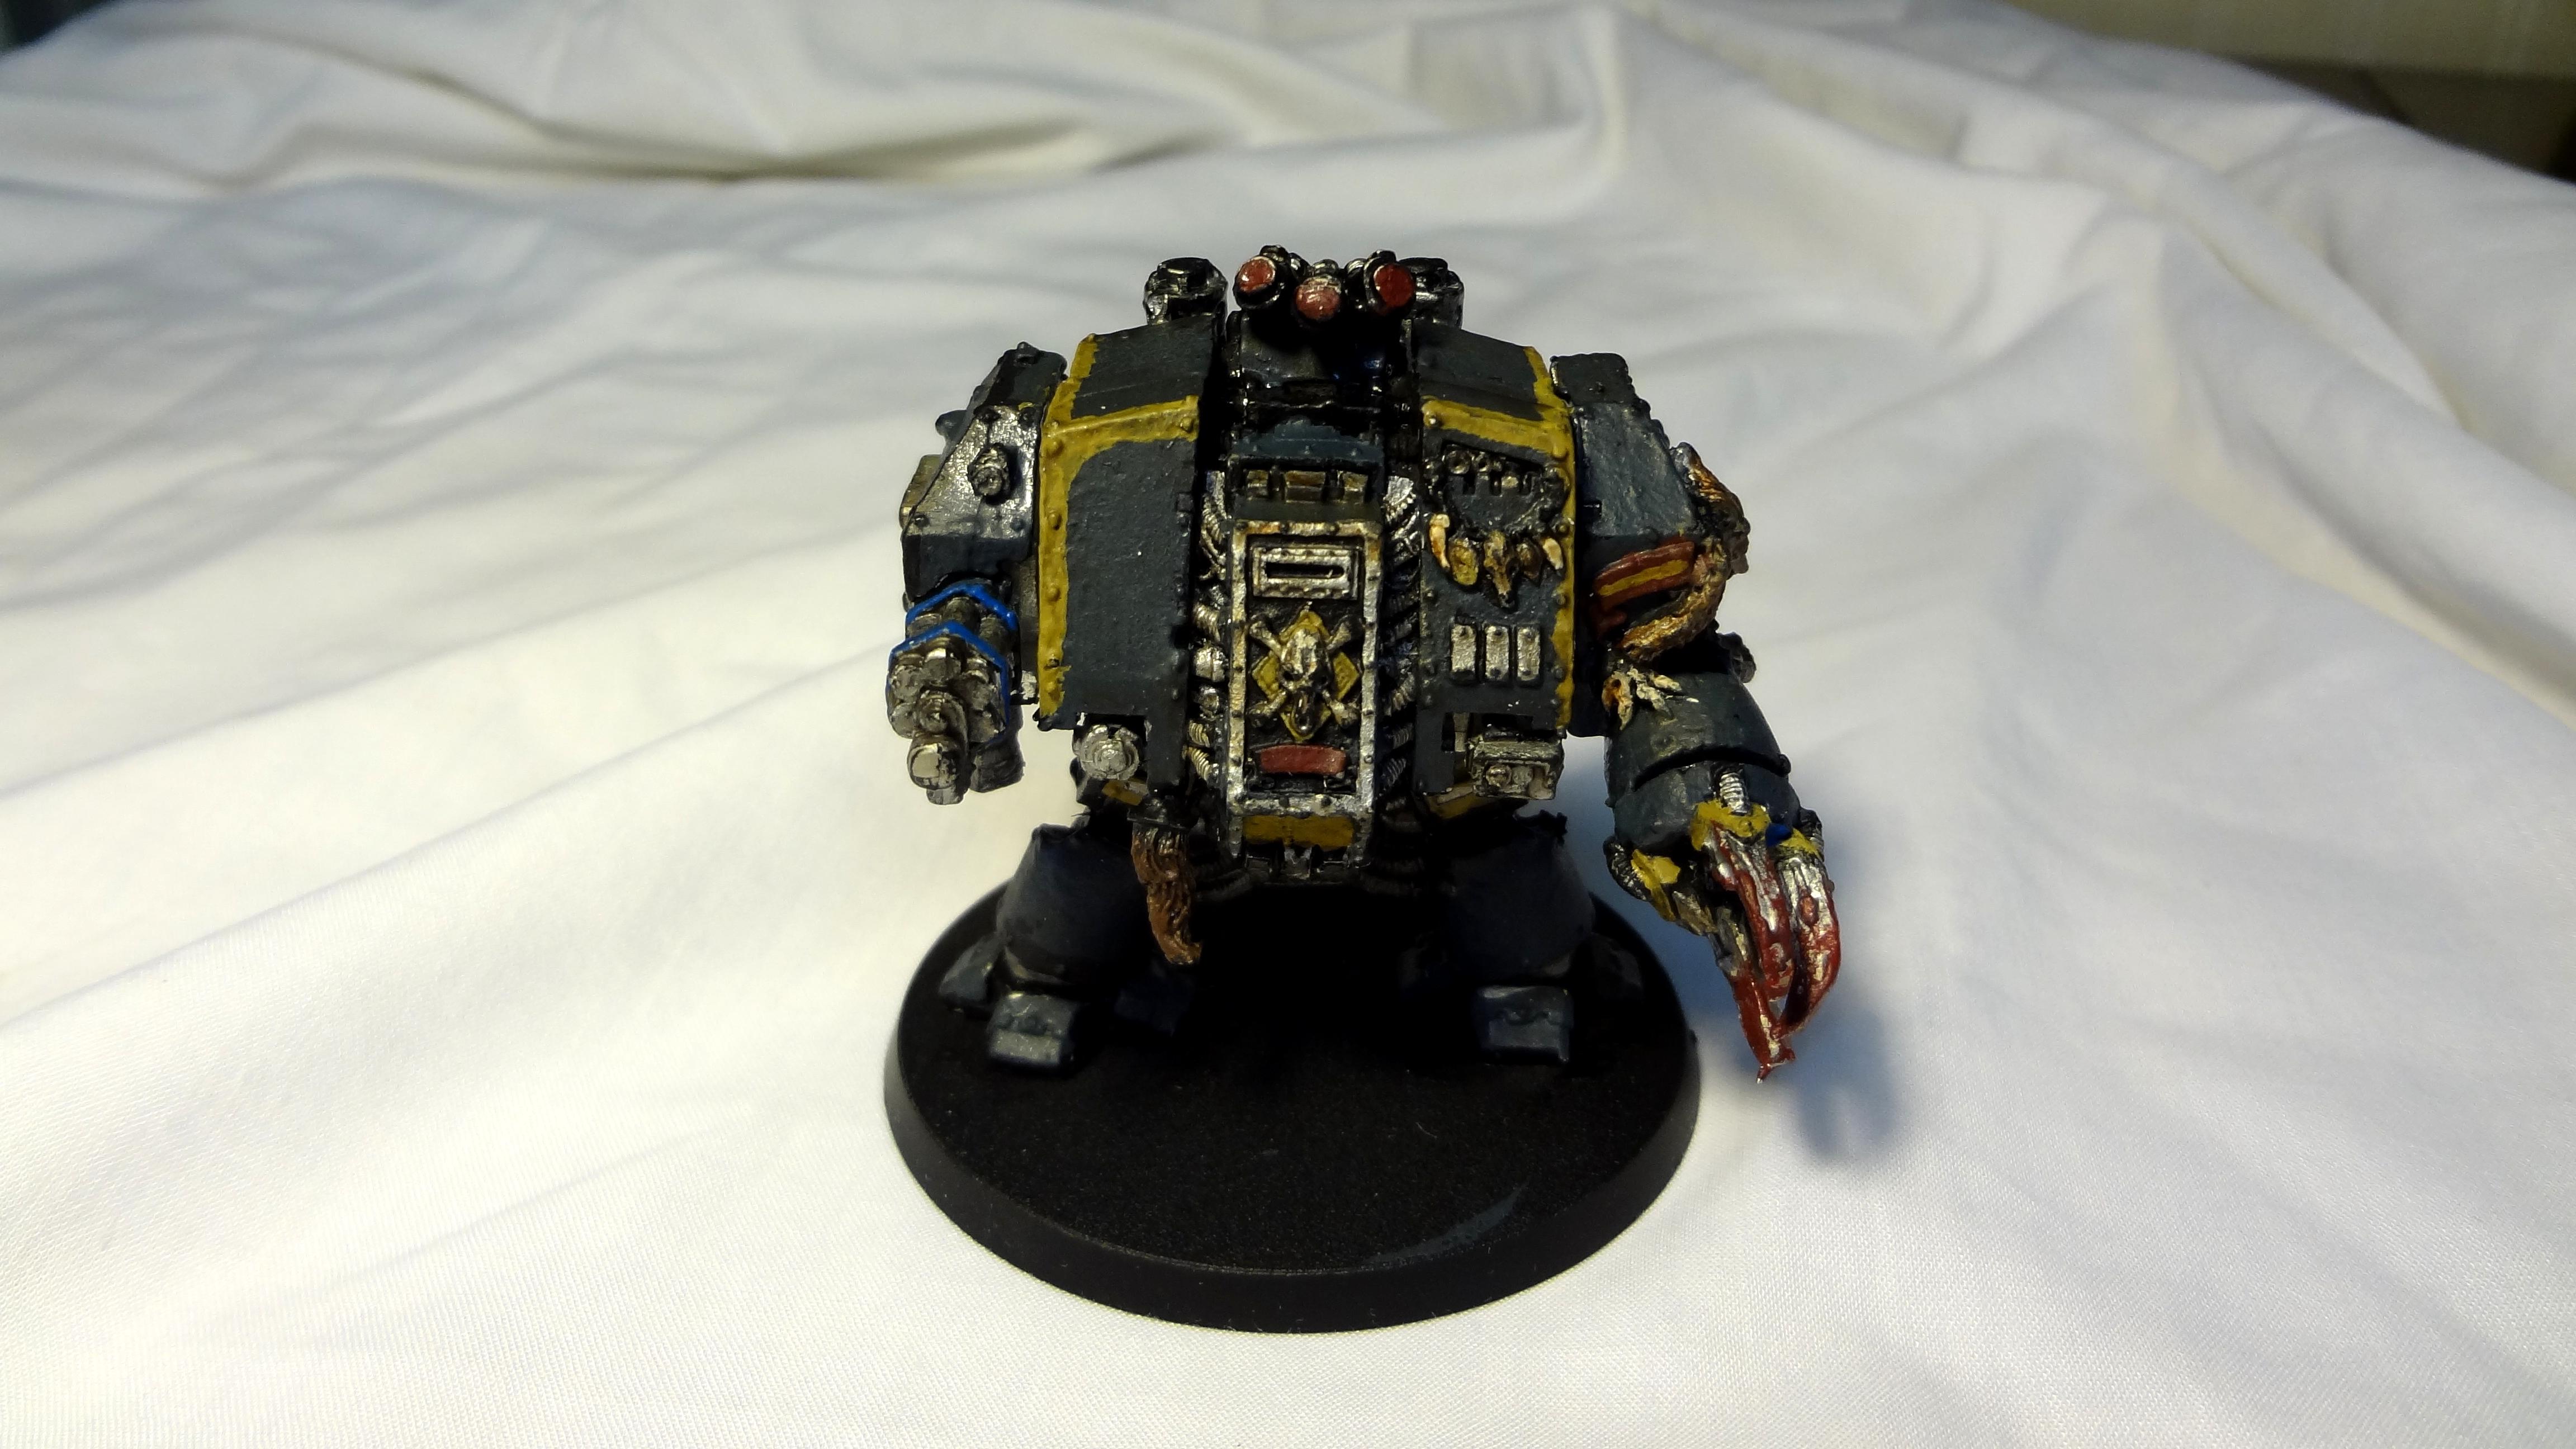 Bjorn The Fell-handed, Space, Space Marines, Terminator Armor, Warhammer 40,000, Warhammer Fantasy, Wolves